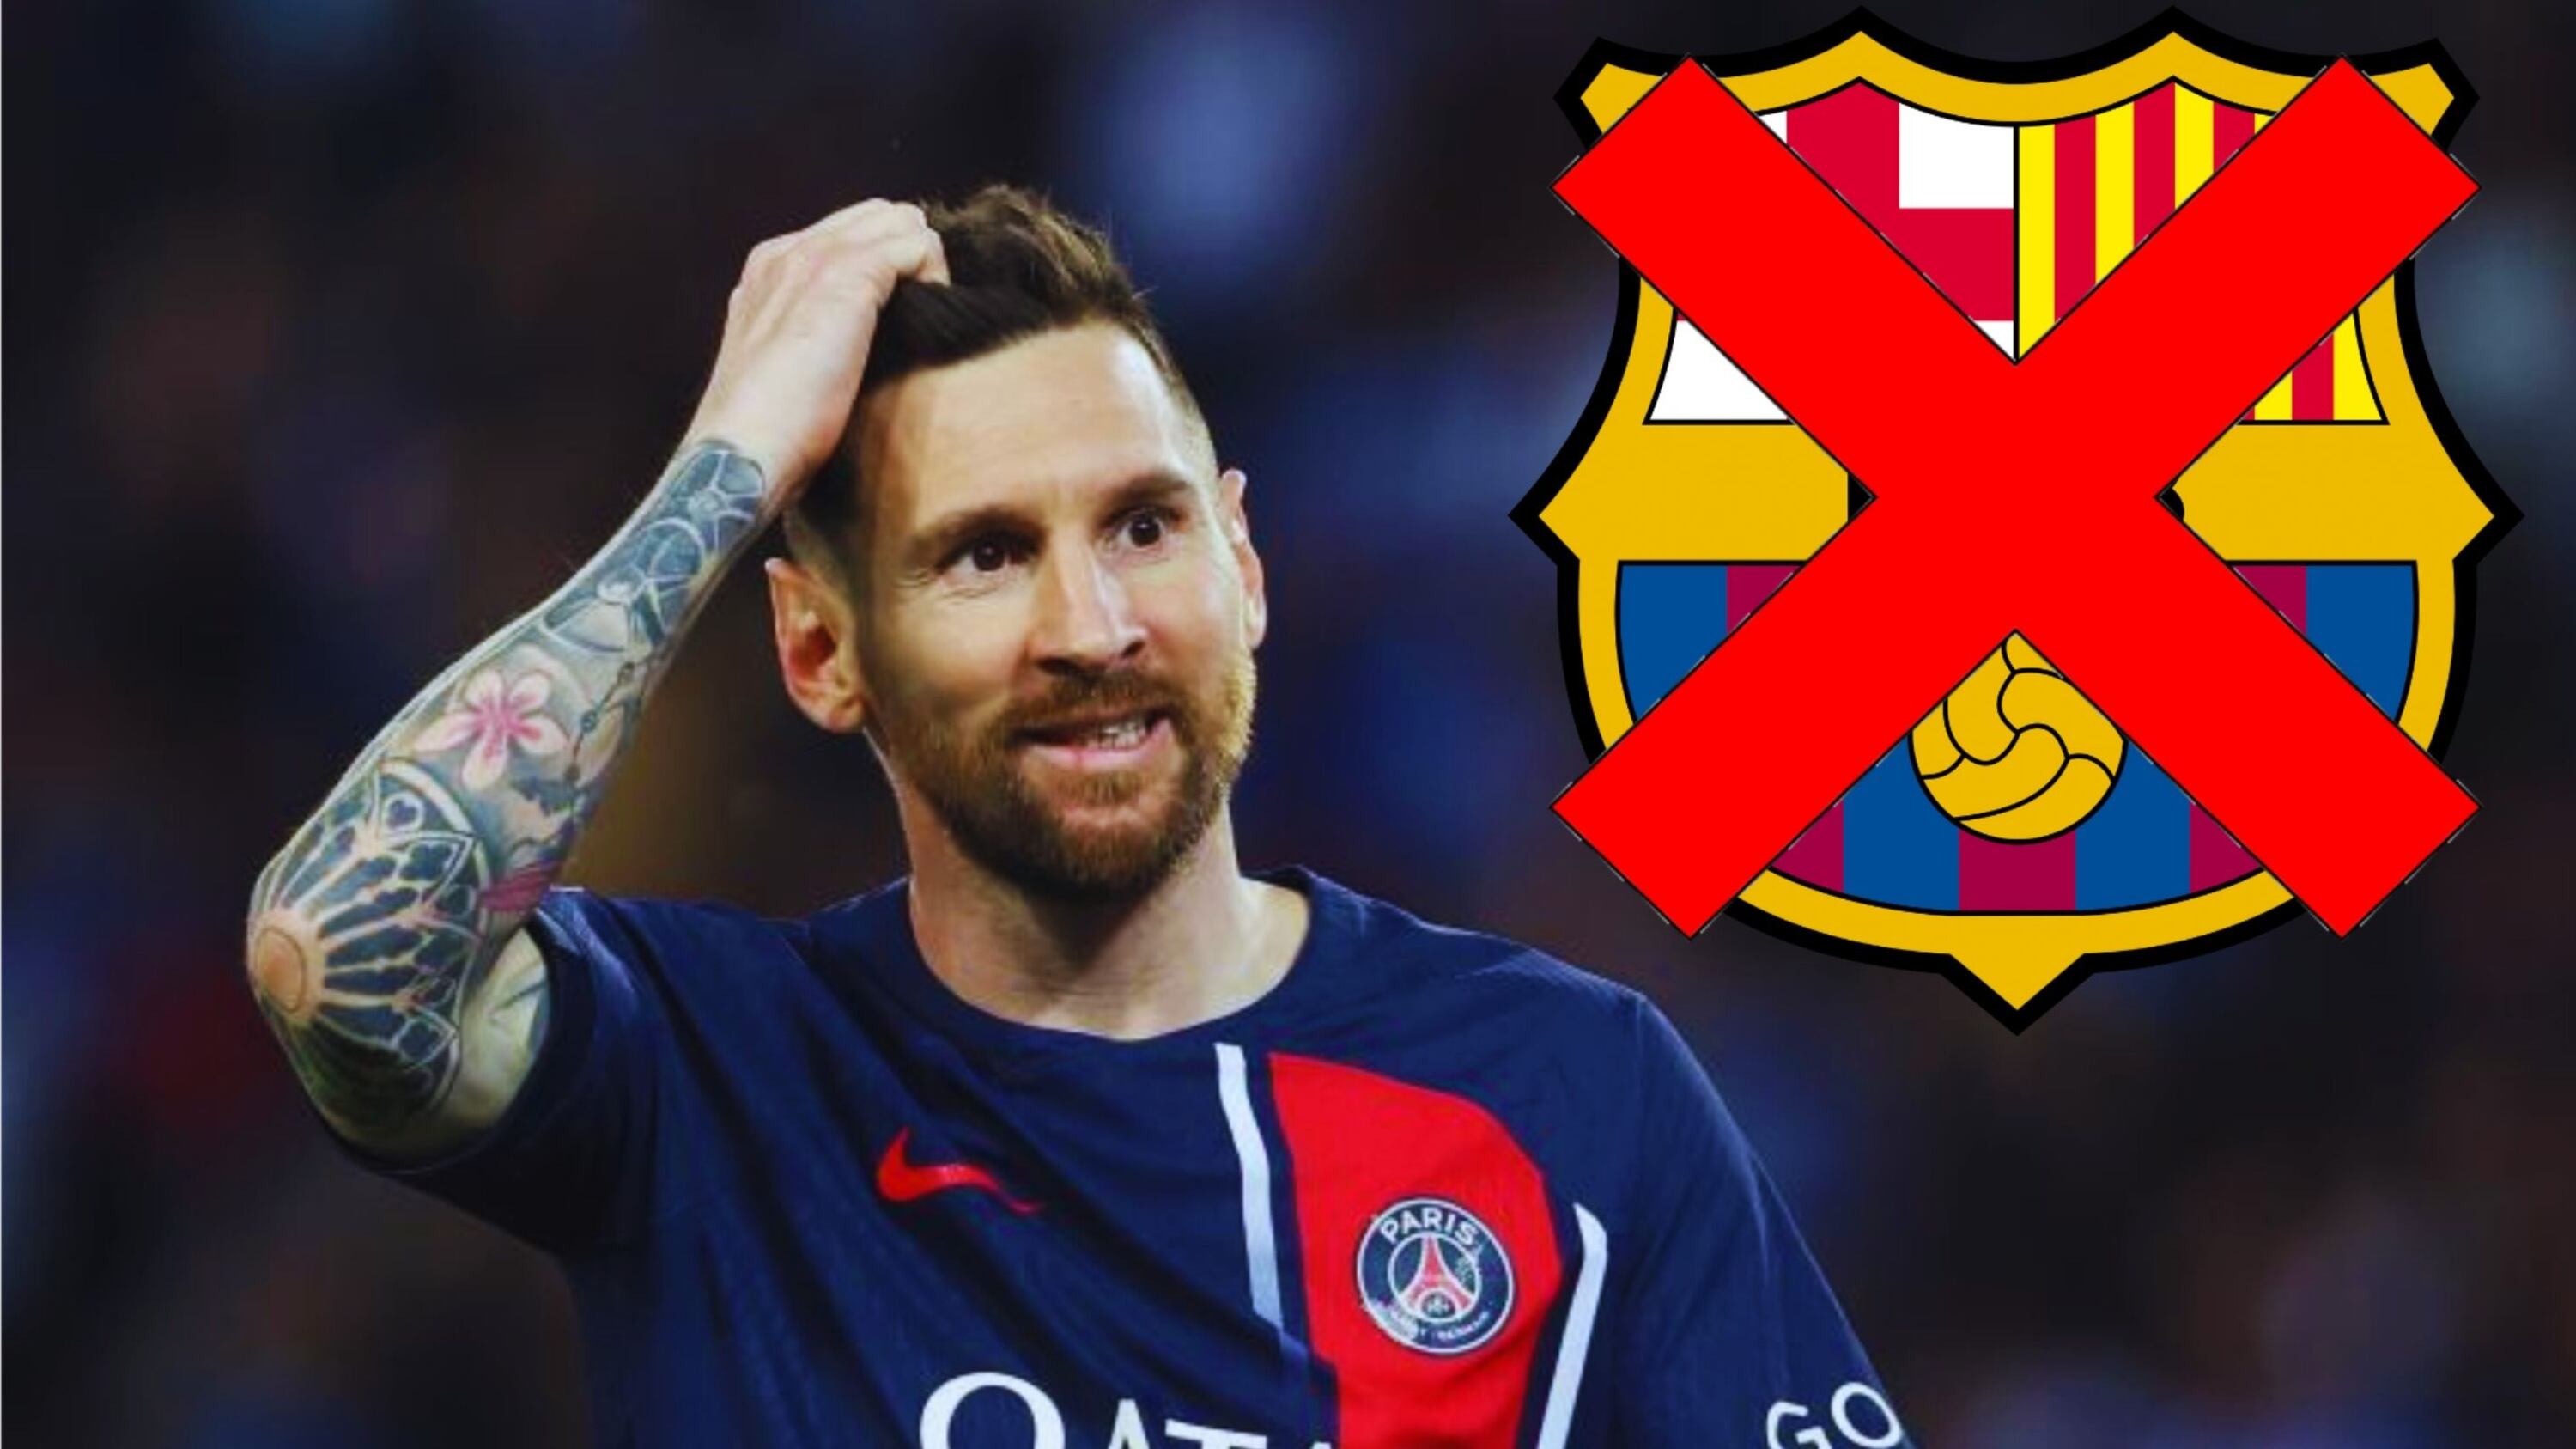 Breaking news, Lionel Messi says no to Barcelona for this reason, he would sign for Al Hilal instead